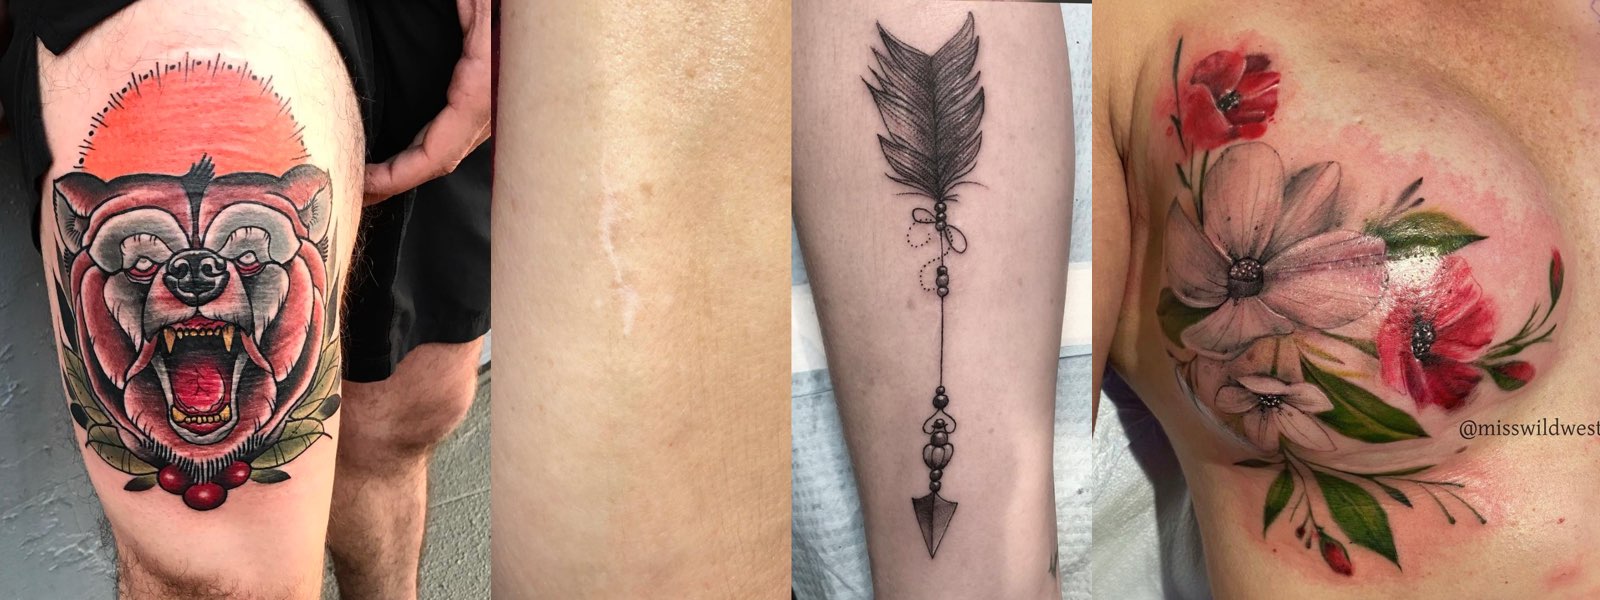 Scar Coverups Using Tattoos